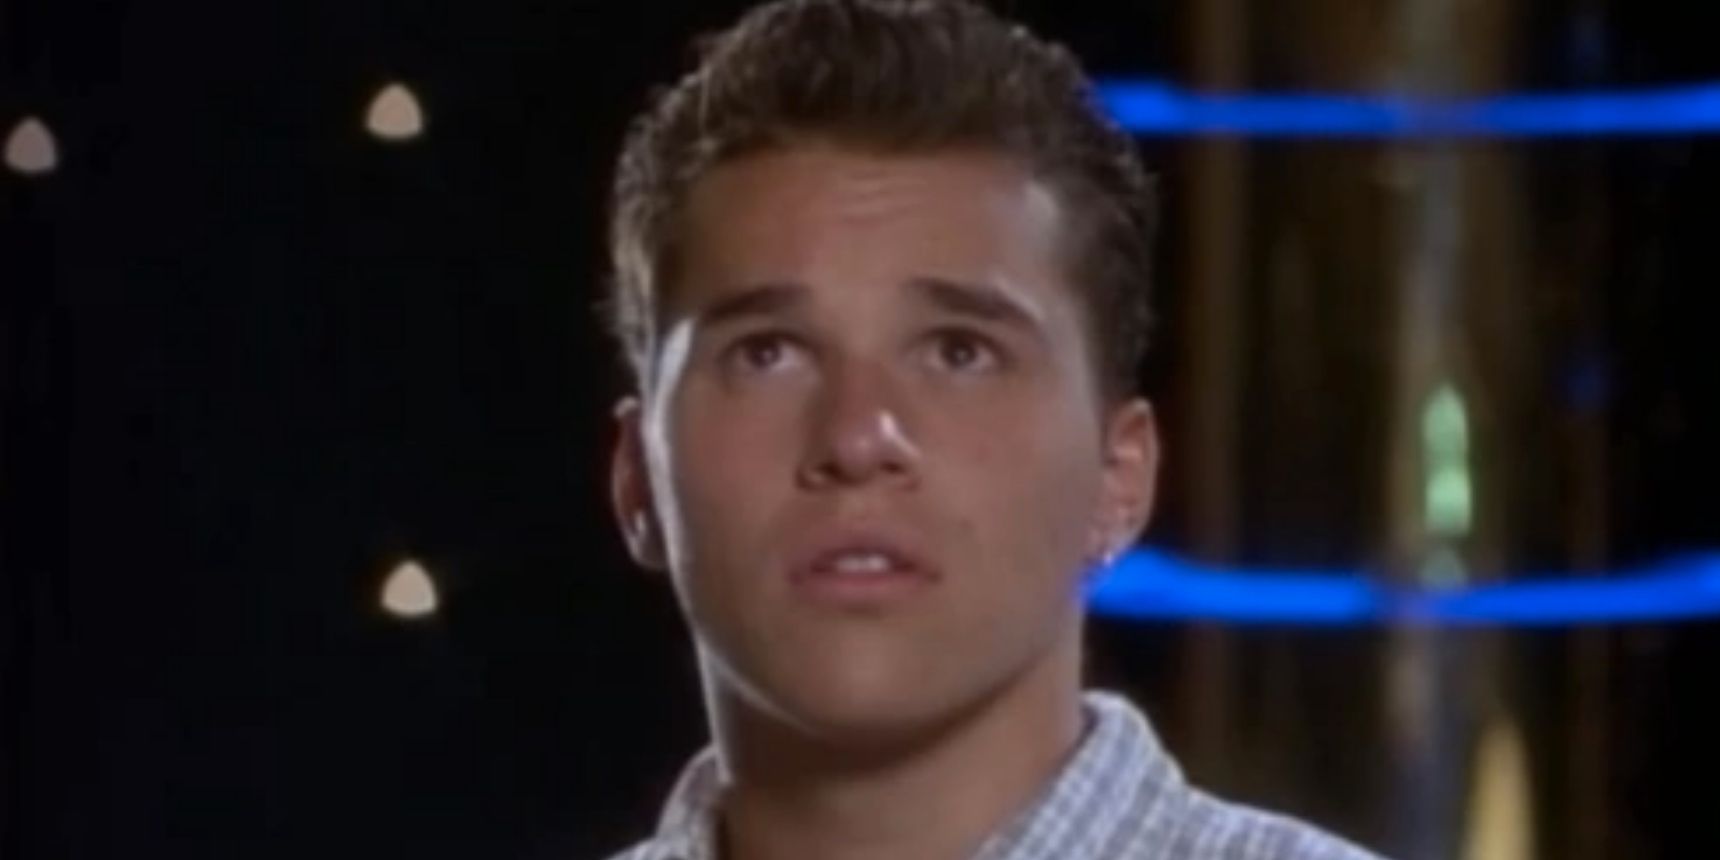 Zack Struggles Without A Partner To Rely On In the early days of the series, Zack is clearly Jason's best friend and the person who is going to jump in first to help his friend out. He's supportive, but he's not great at taking the lead in the field or at the Youth Center. RELATED: Power Rangers: 10 Ways The Series Has Changed Since 1993 In fact, Zack rarely takes on anything alone or first. When he volunteers to teach self defense classes or martial arts, it's Jason taking the lead and Zack hel